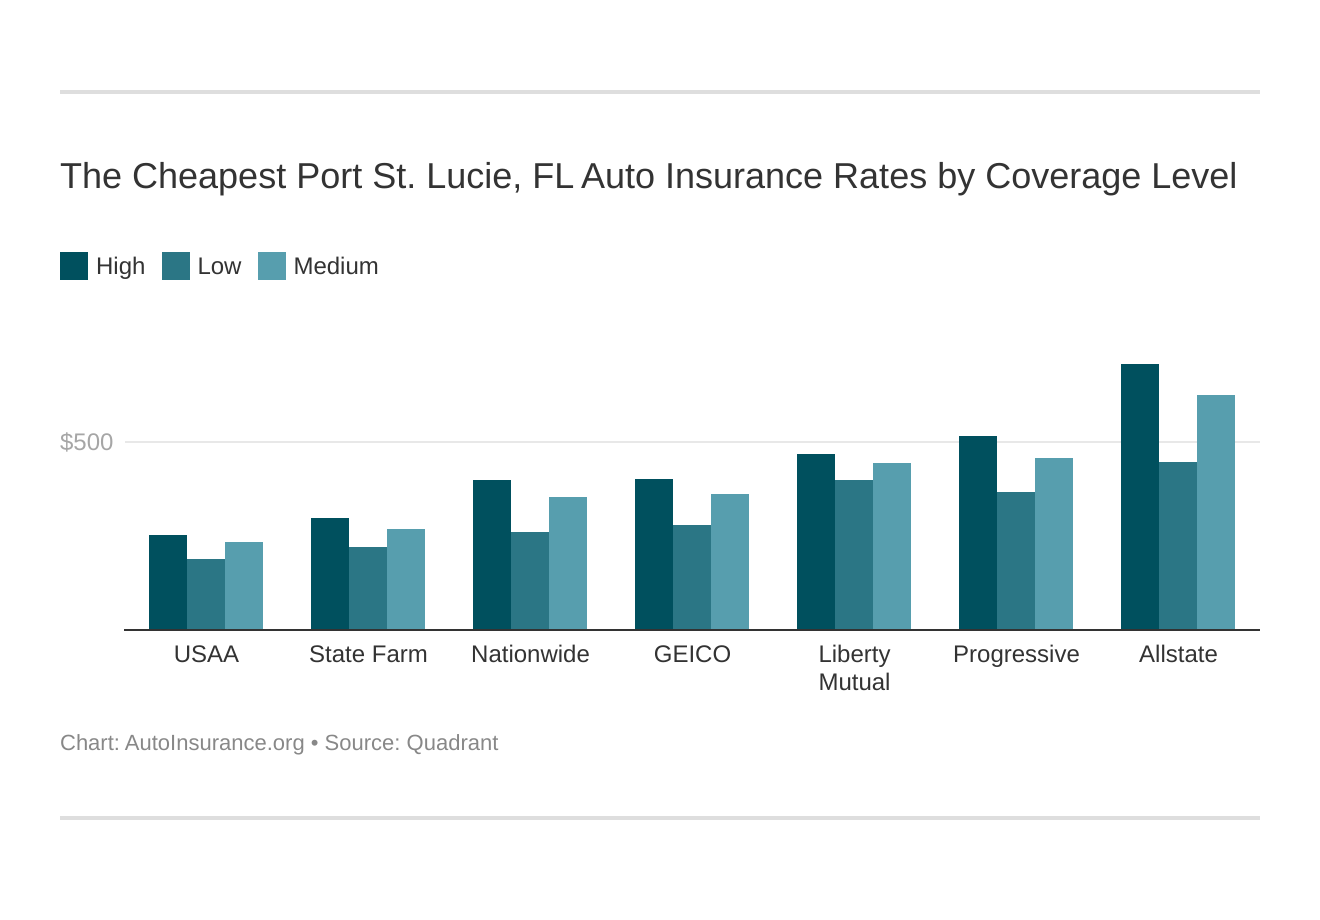 The Cheapest Port St. Lucie, FL Auto Insurance Rates by Coverage Level